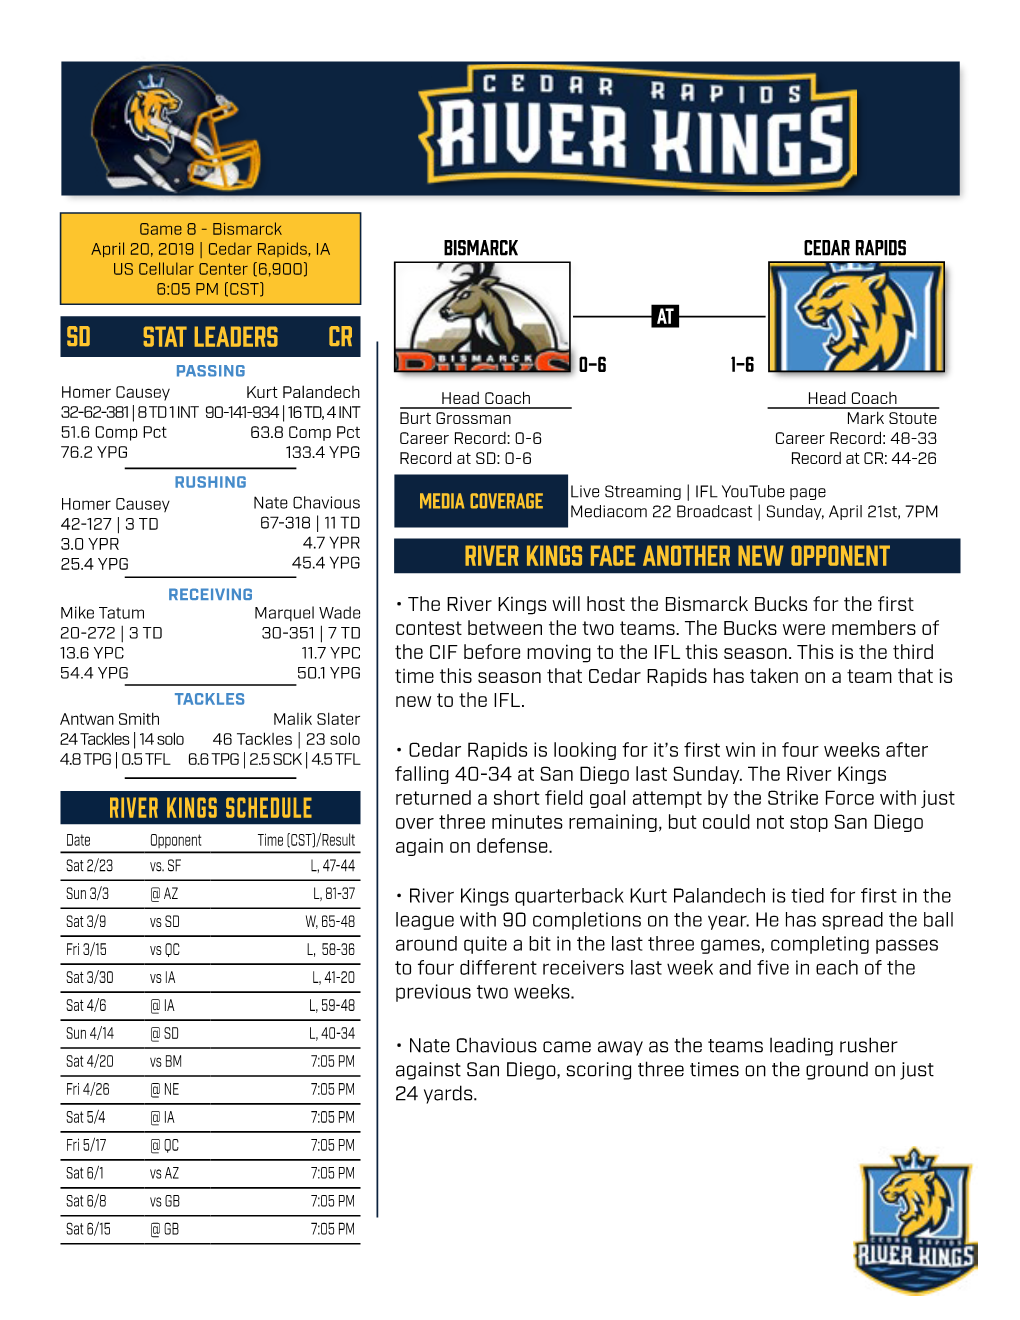 STAT LEADERS SD CR River Kings Schedule RIVER Kings Face